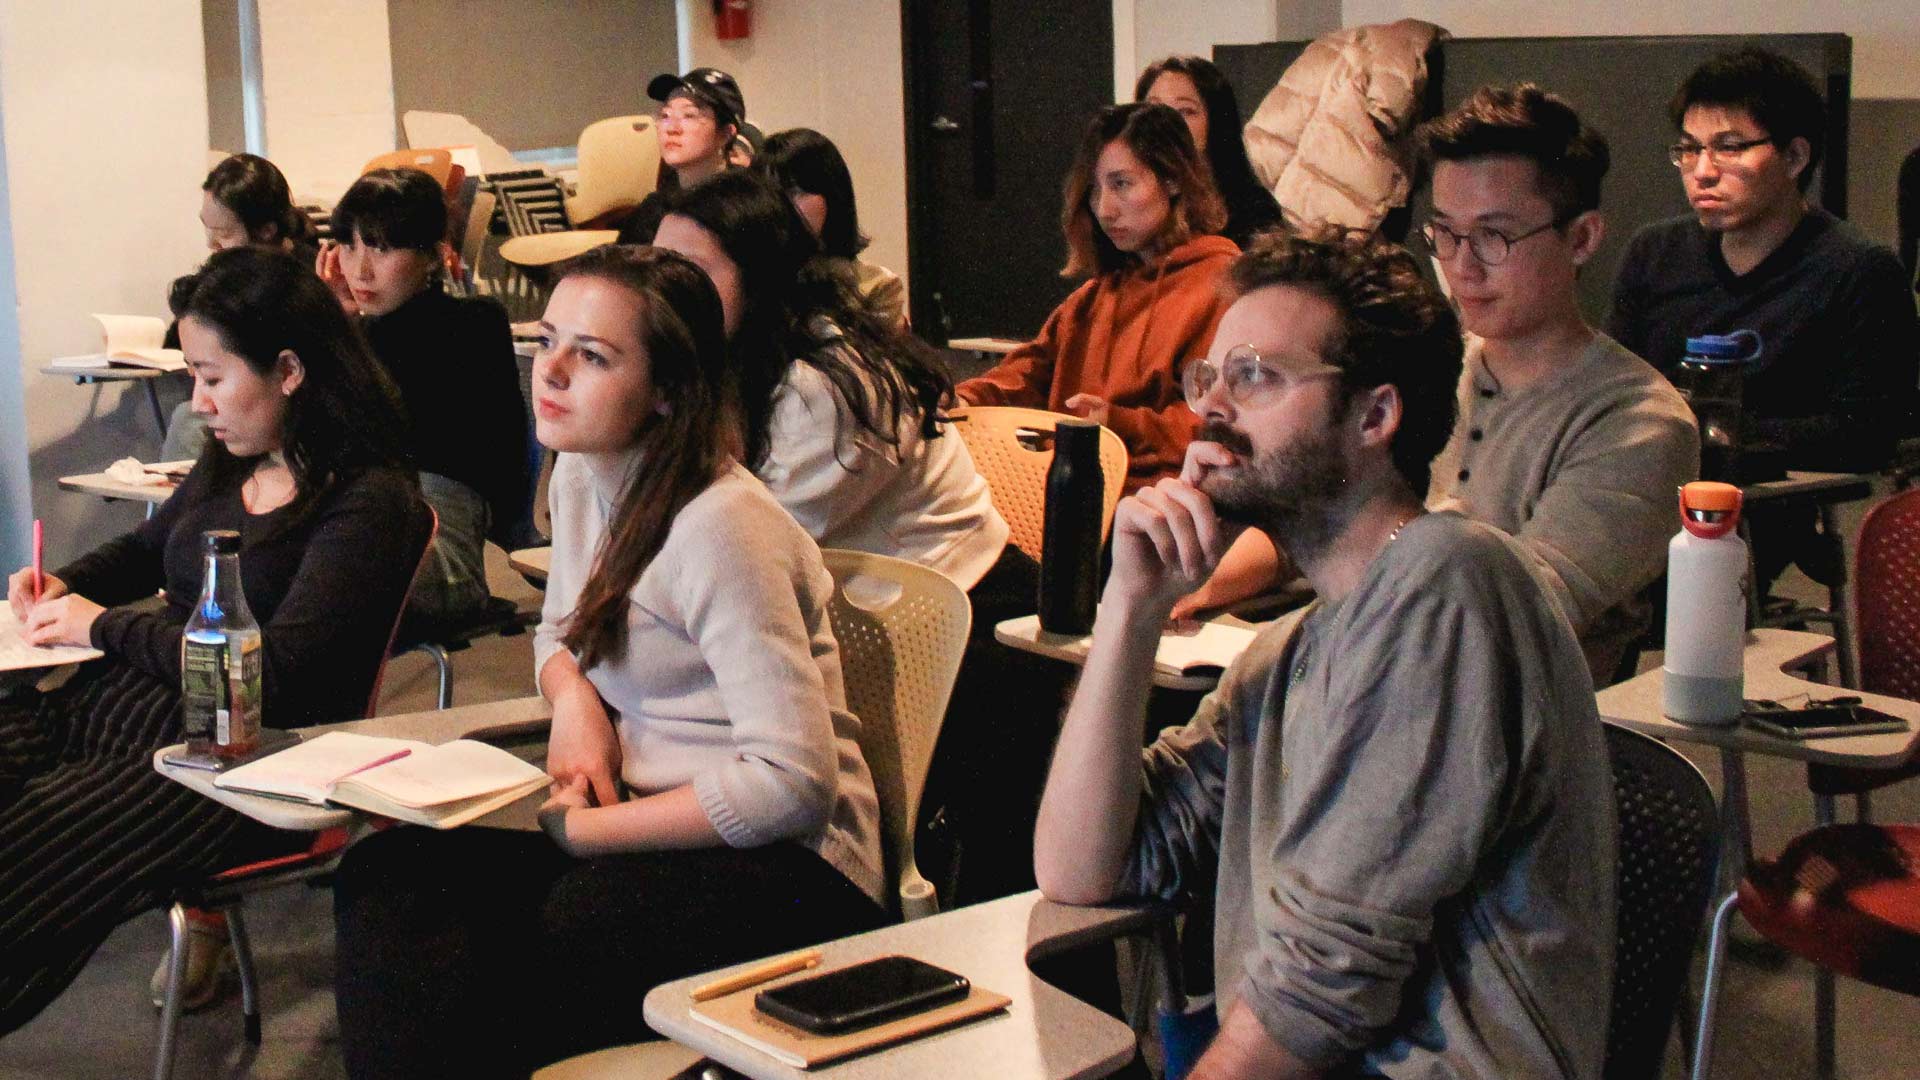 Students at SVA MFA Design watching a lecture in a darkened classroom